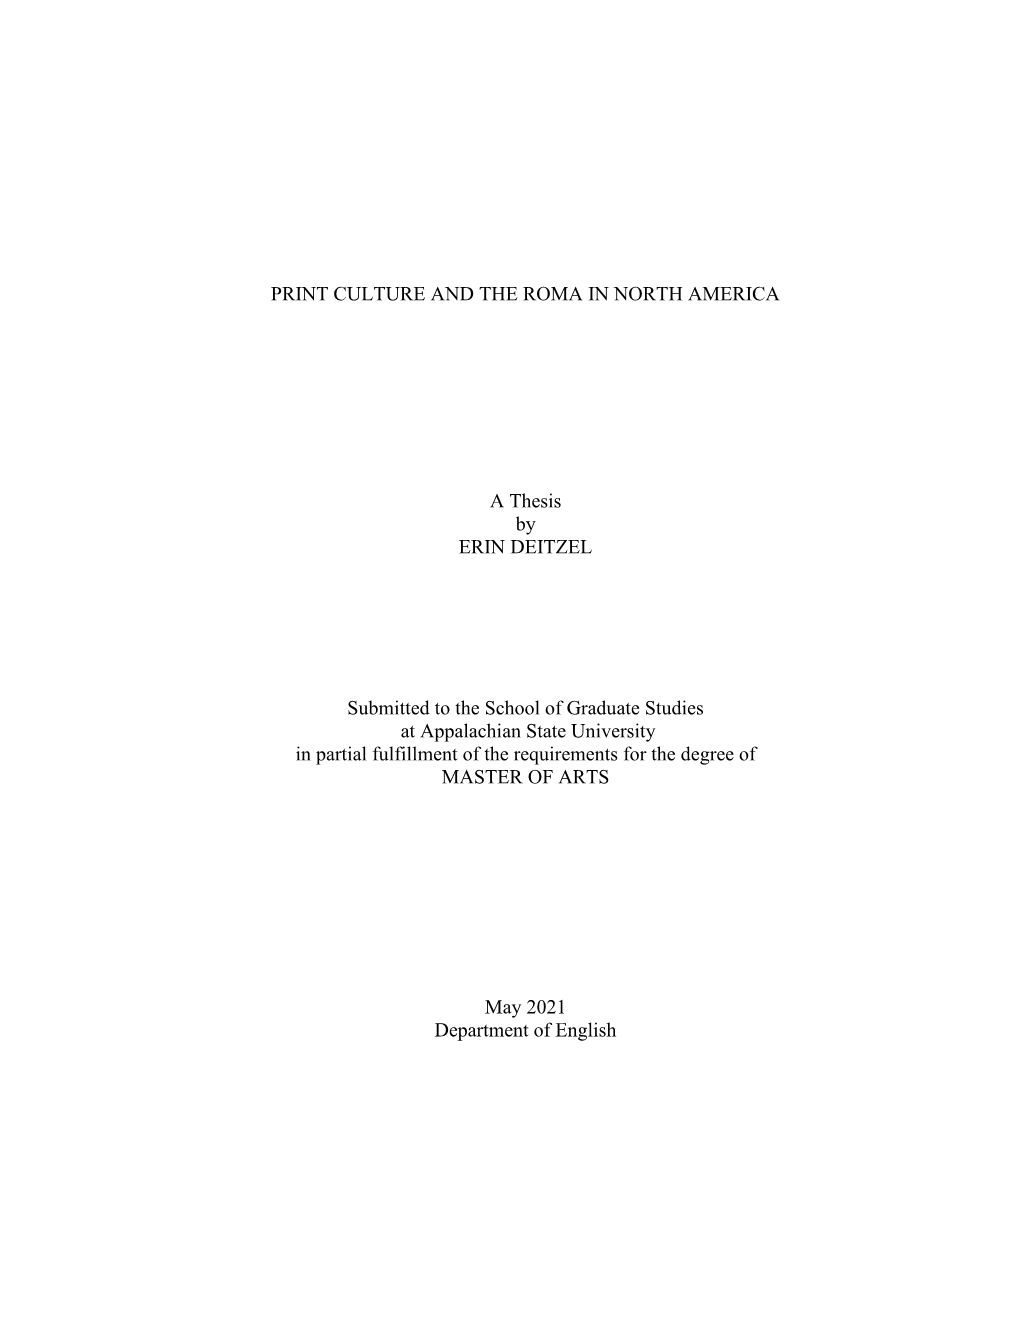 PRINT CULTURE and the ROMA in NORTH AMERICA a Thesis By